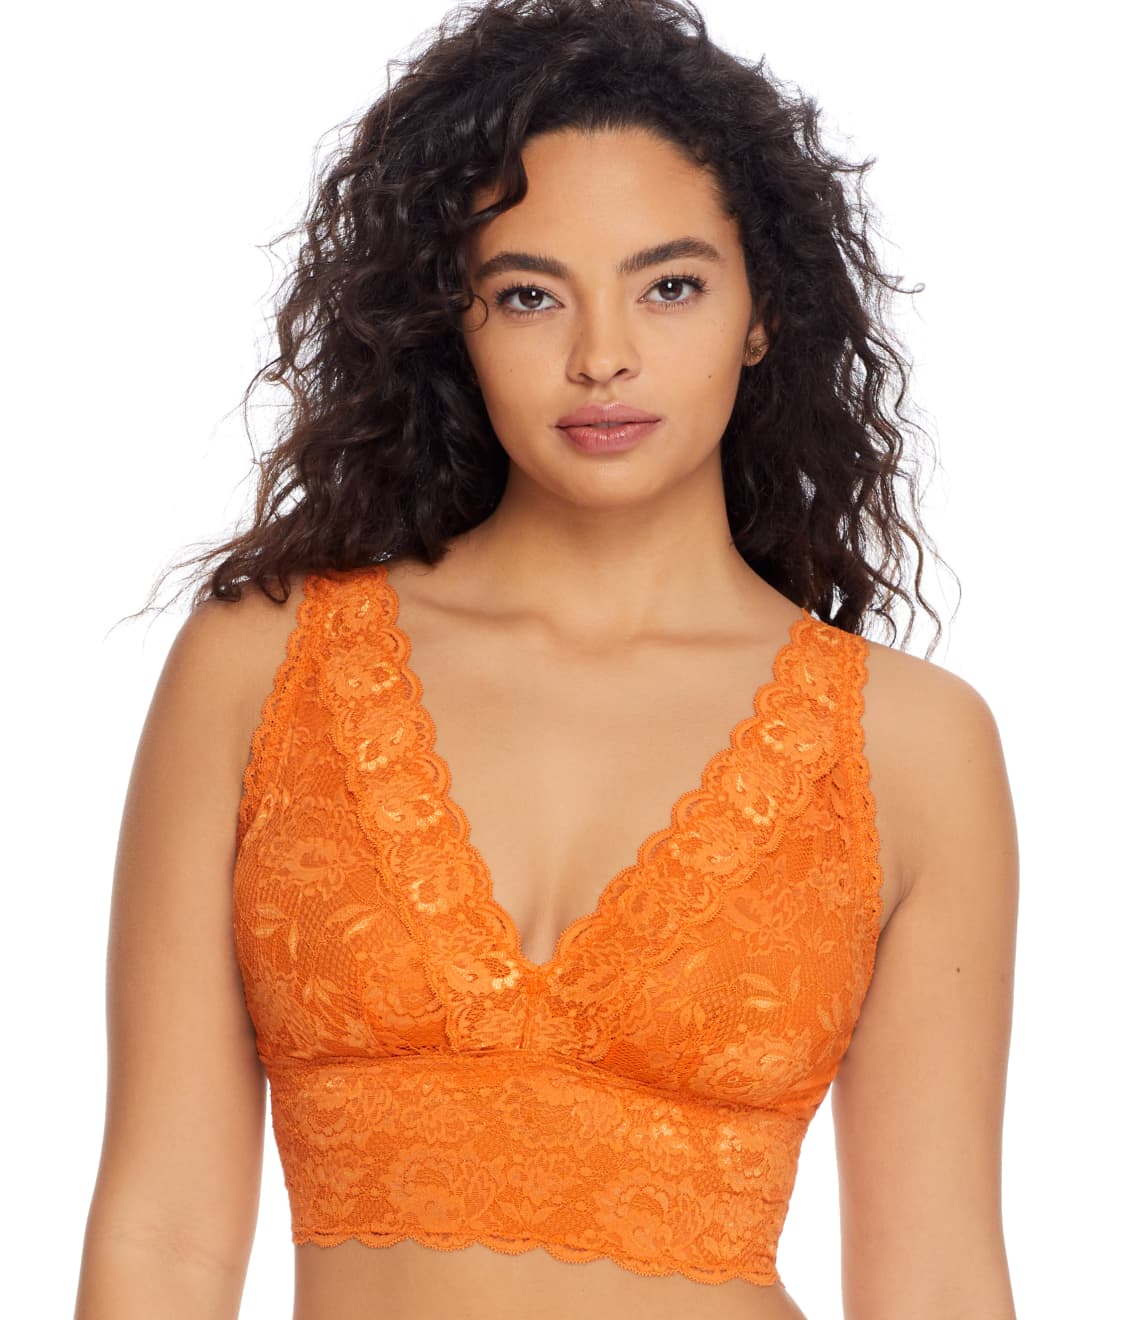 Cosabella: Never Say Never Curvy Plunge Longline Bralette NEVER1385